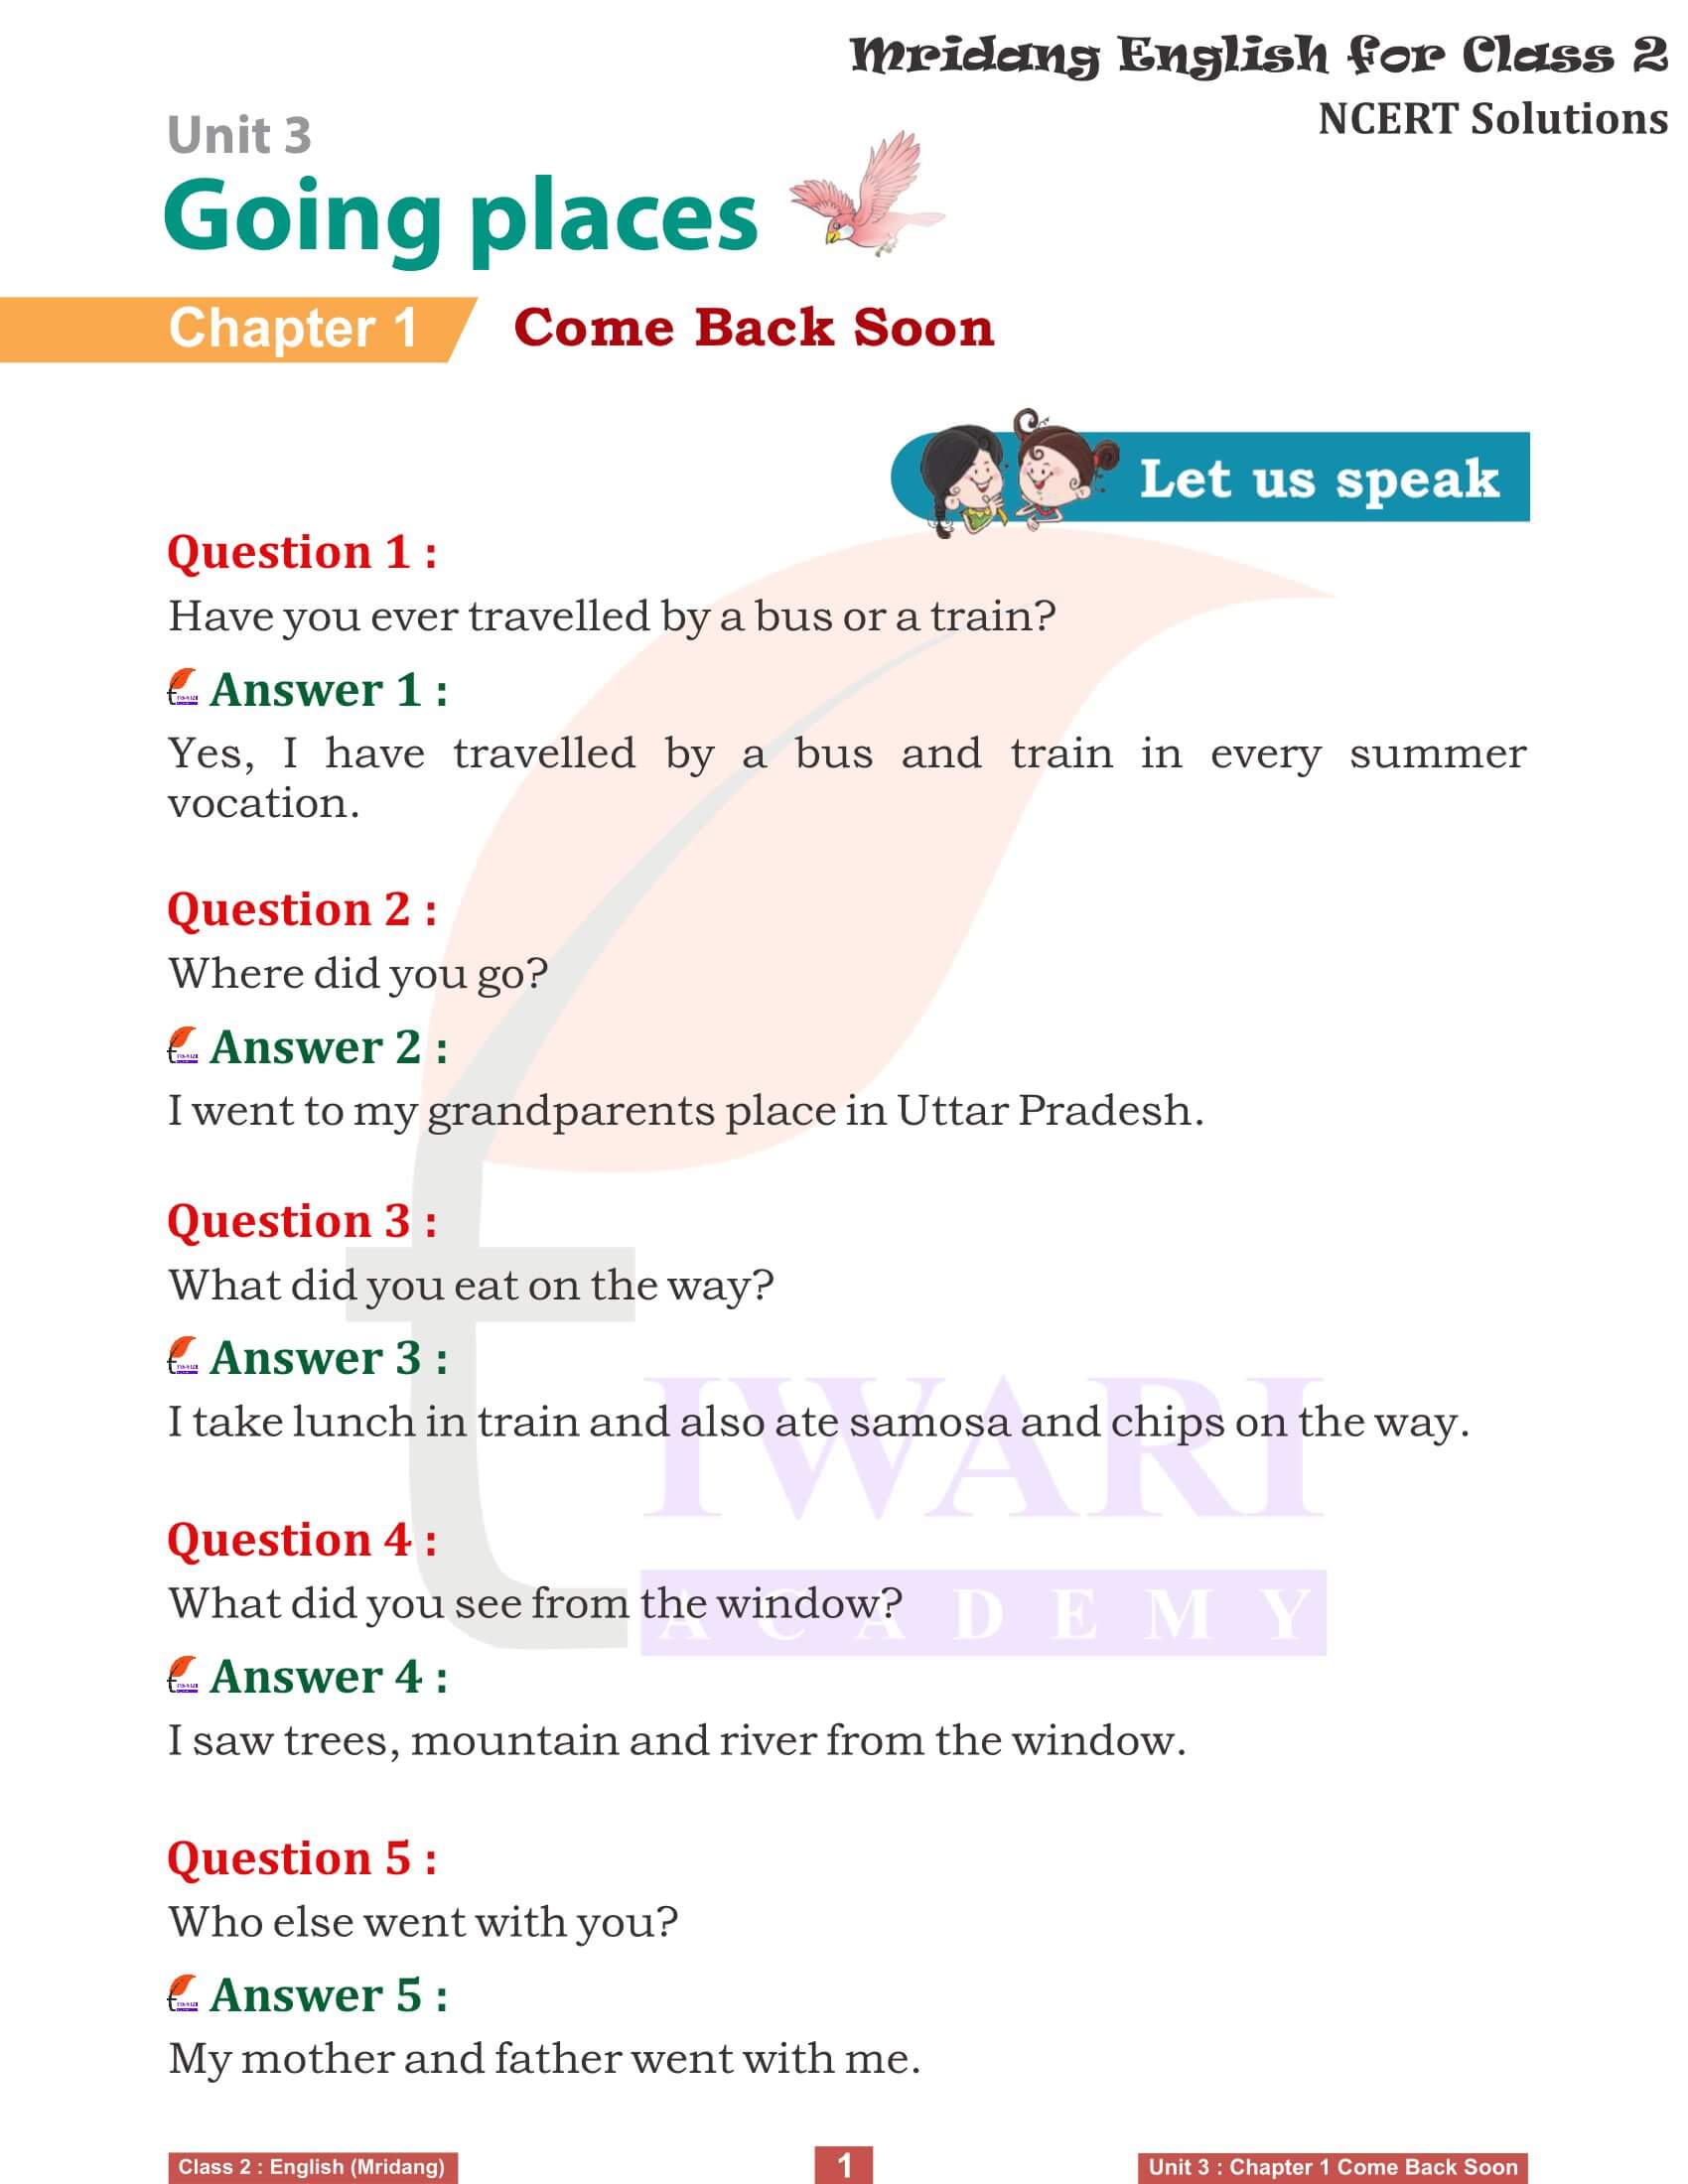 NCERT Solutions for Class 2 English Mridang Unit 3 Going Places Chapter 1 Come Back Soon